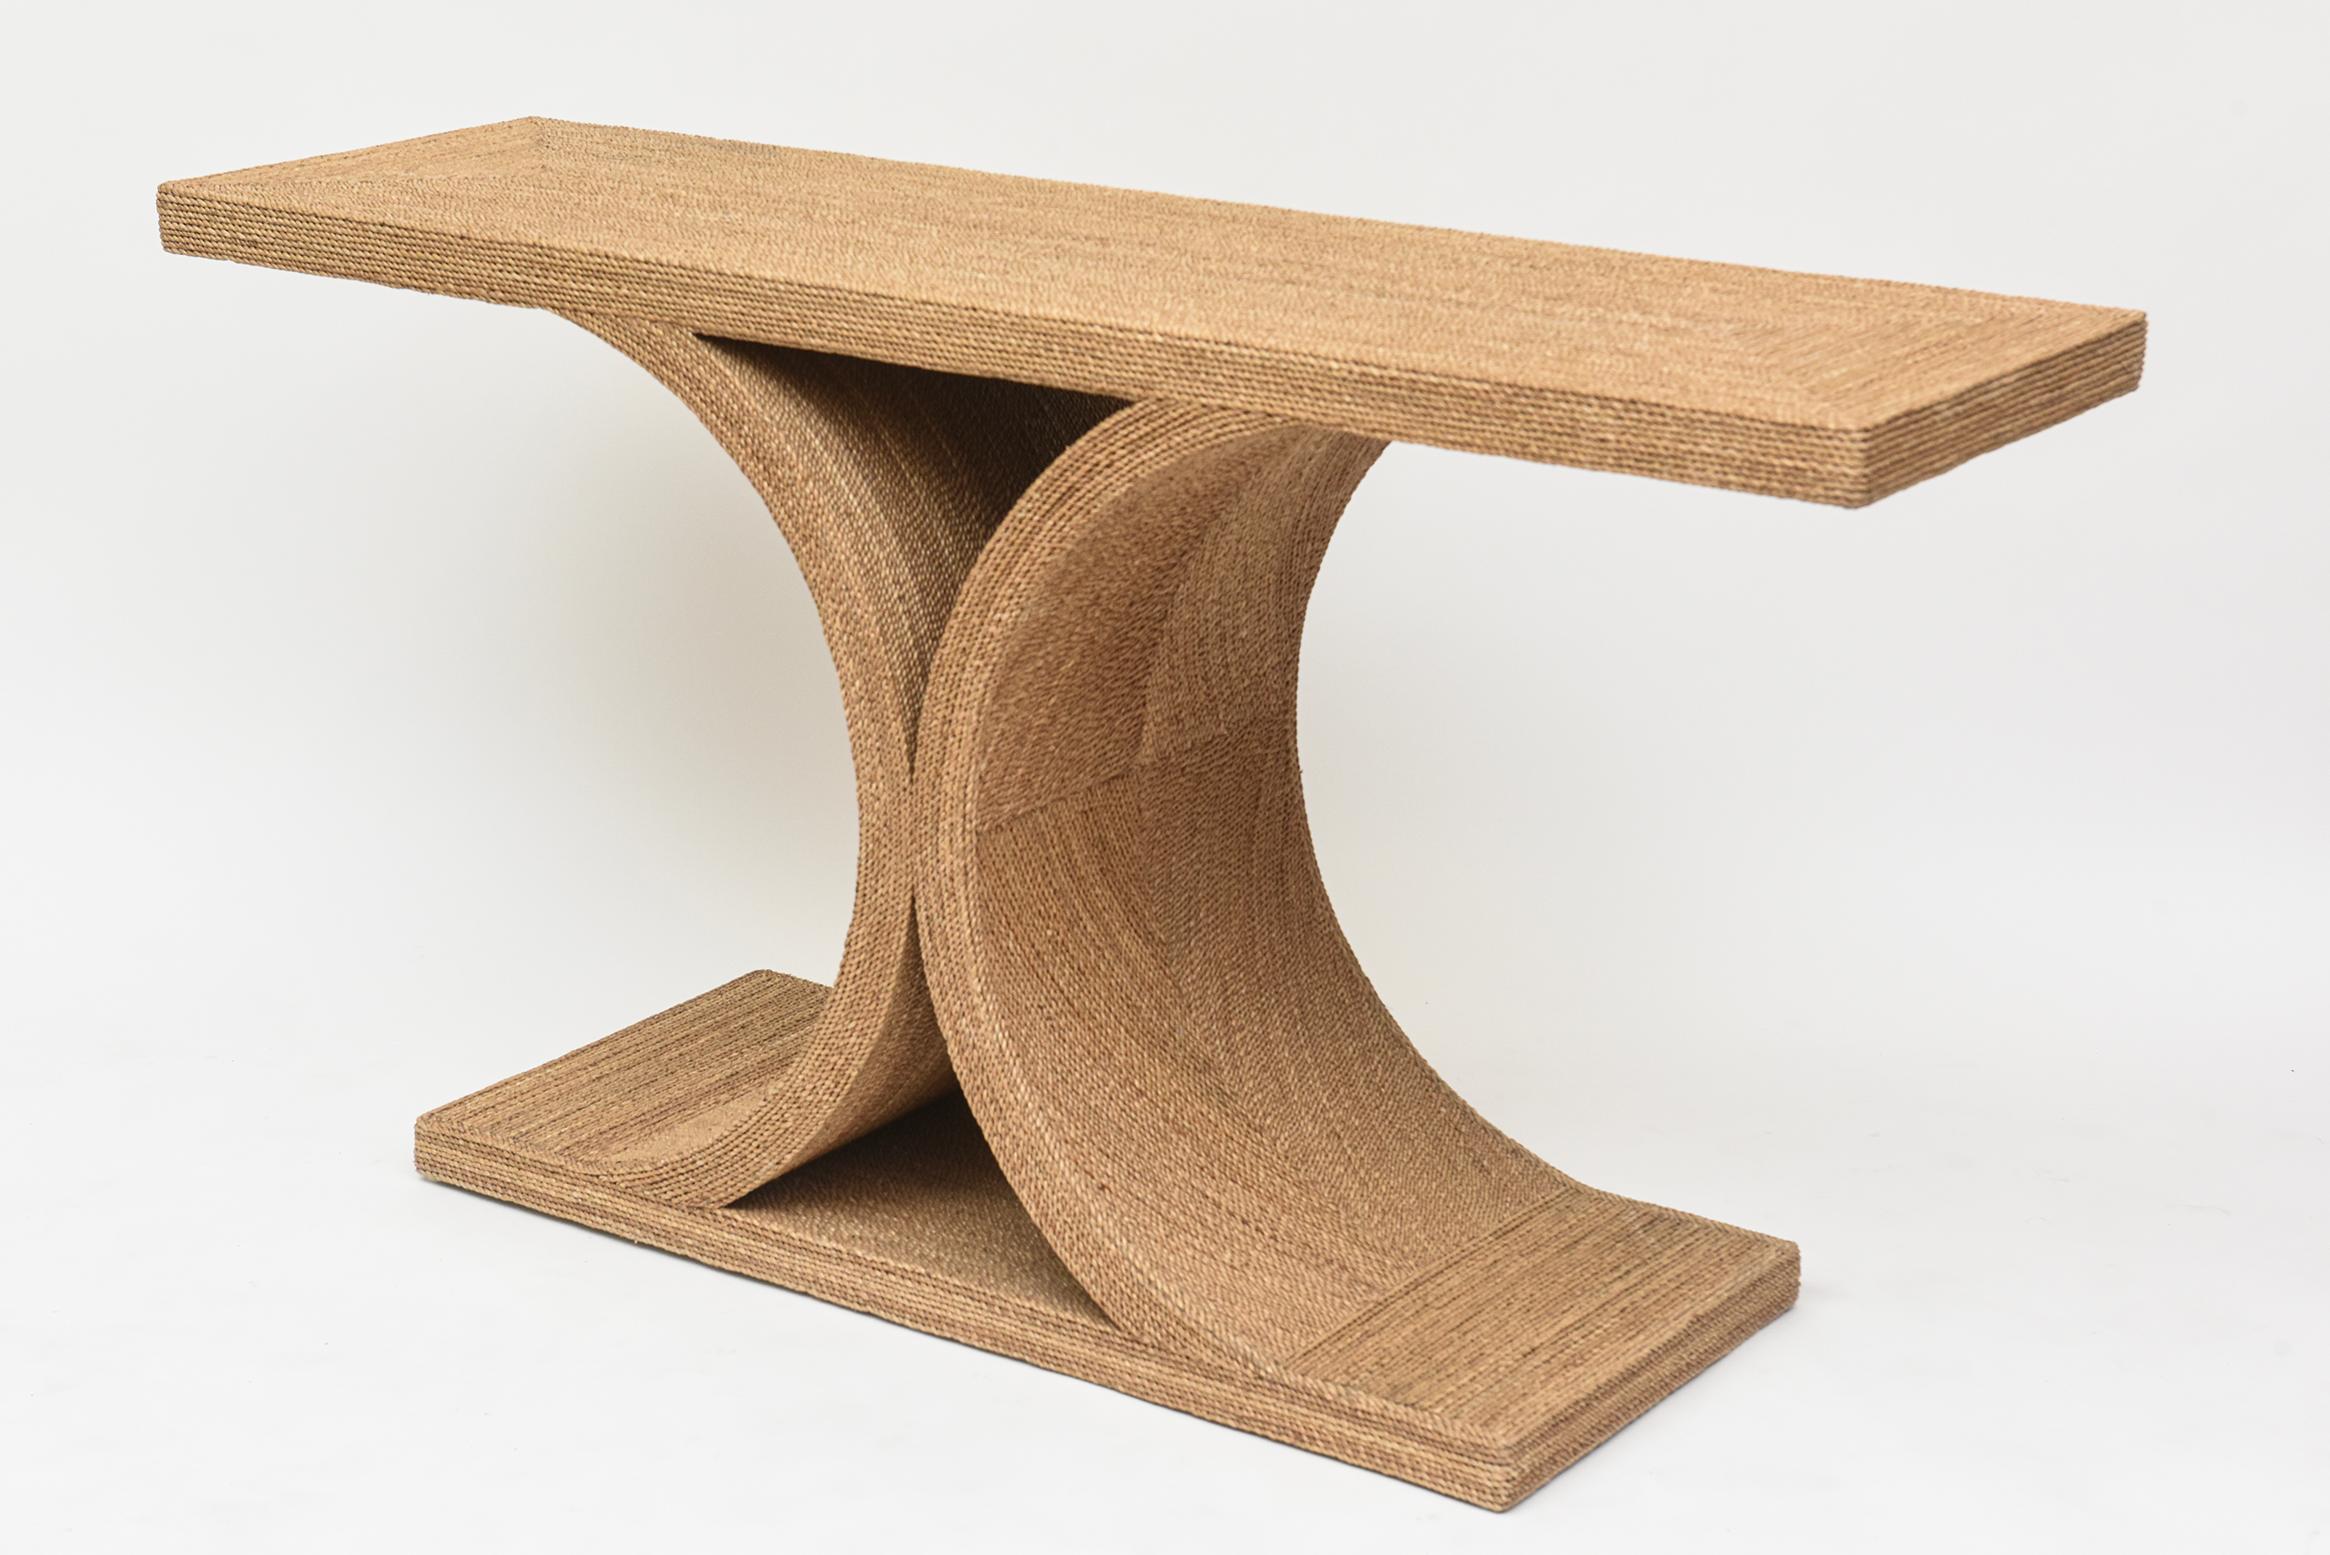 A casual riff on the JMF console by Karl Springer (which was inspired by a much earlier Jean Michel Frank design), this rope stylish console threads the needle between formal and fresh, bourgeois and beachy.